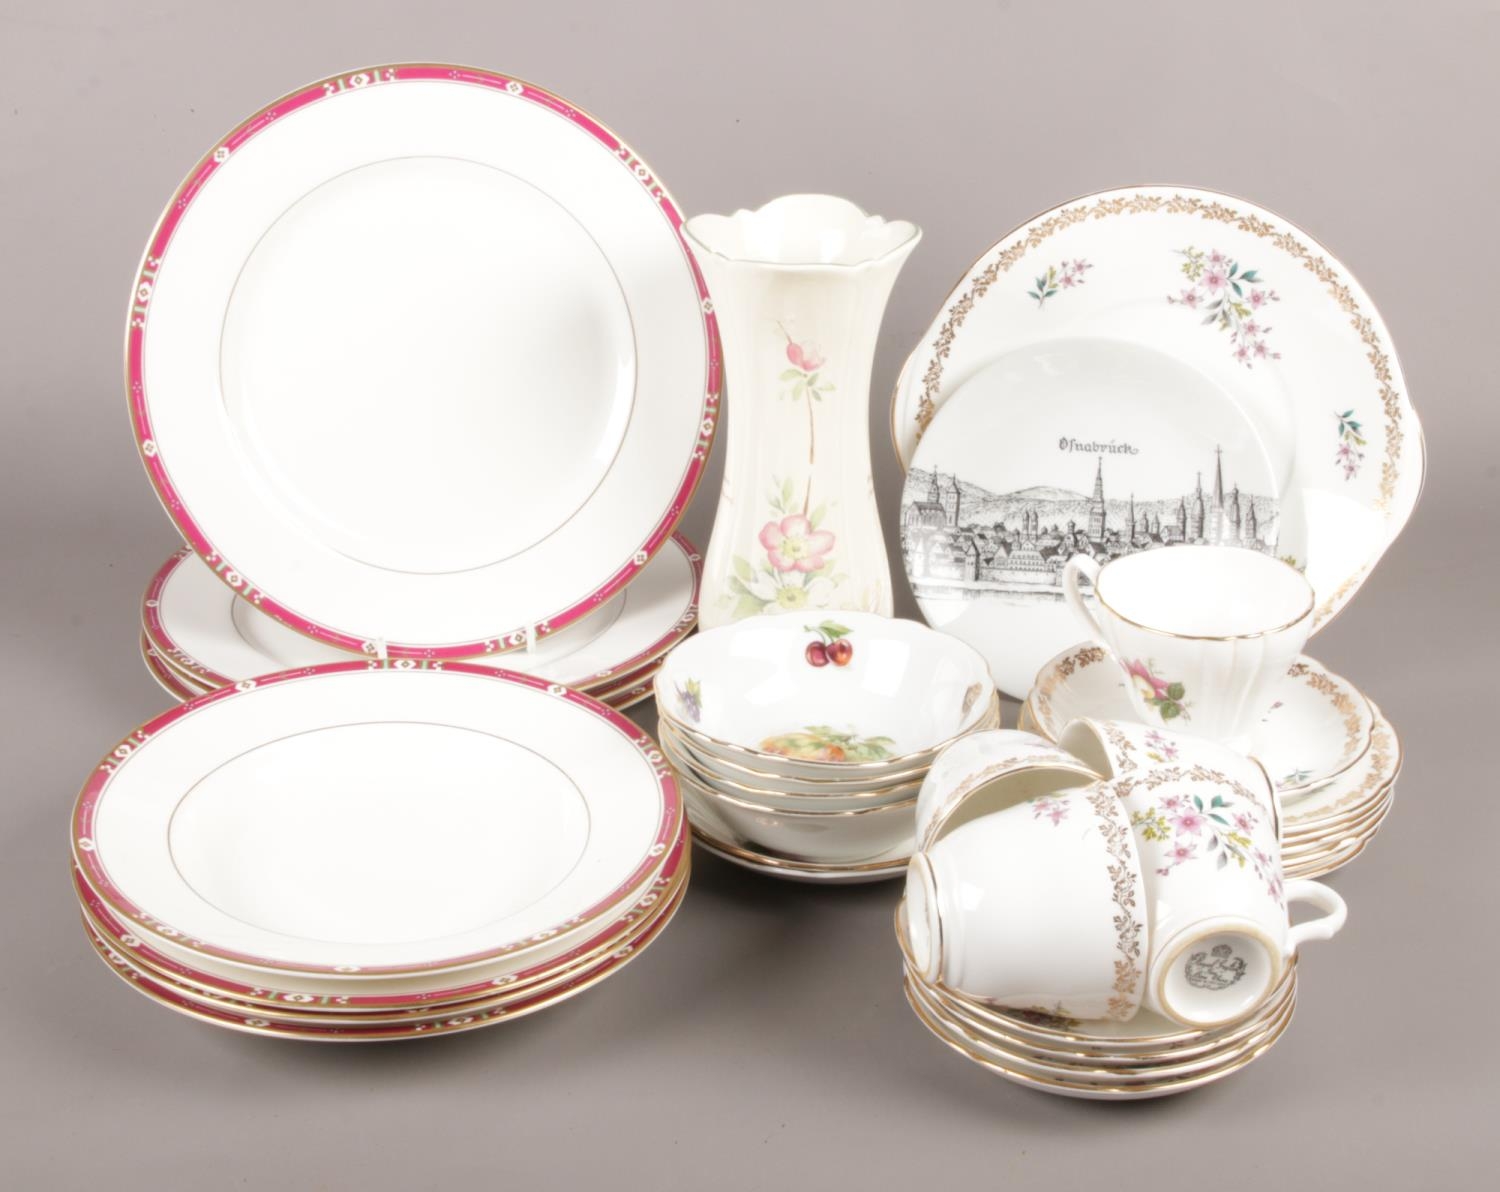 A quantity of part tea sets. Includes cups, saucers and dinner plates from Royal Grafton, Royal